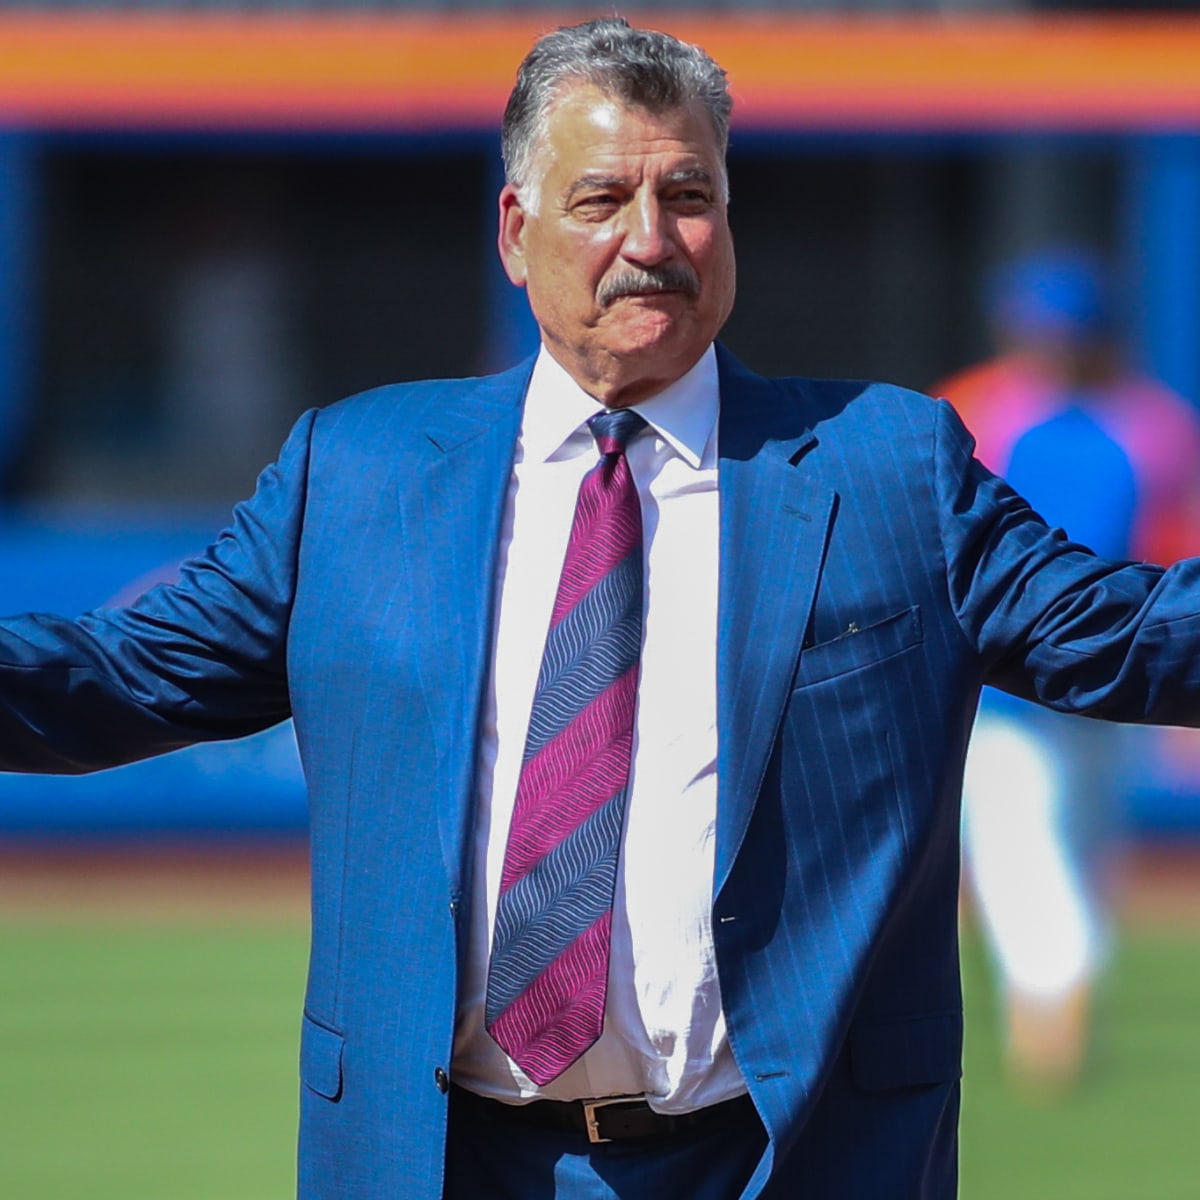 Keith Hernandez lauds Phillies' World Series run: 'Right moves